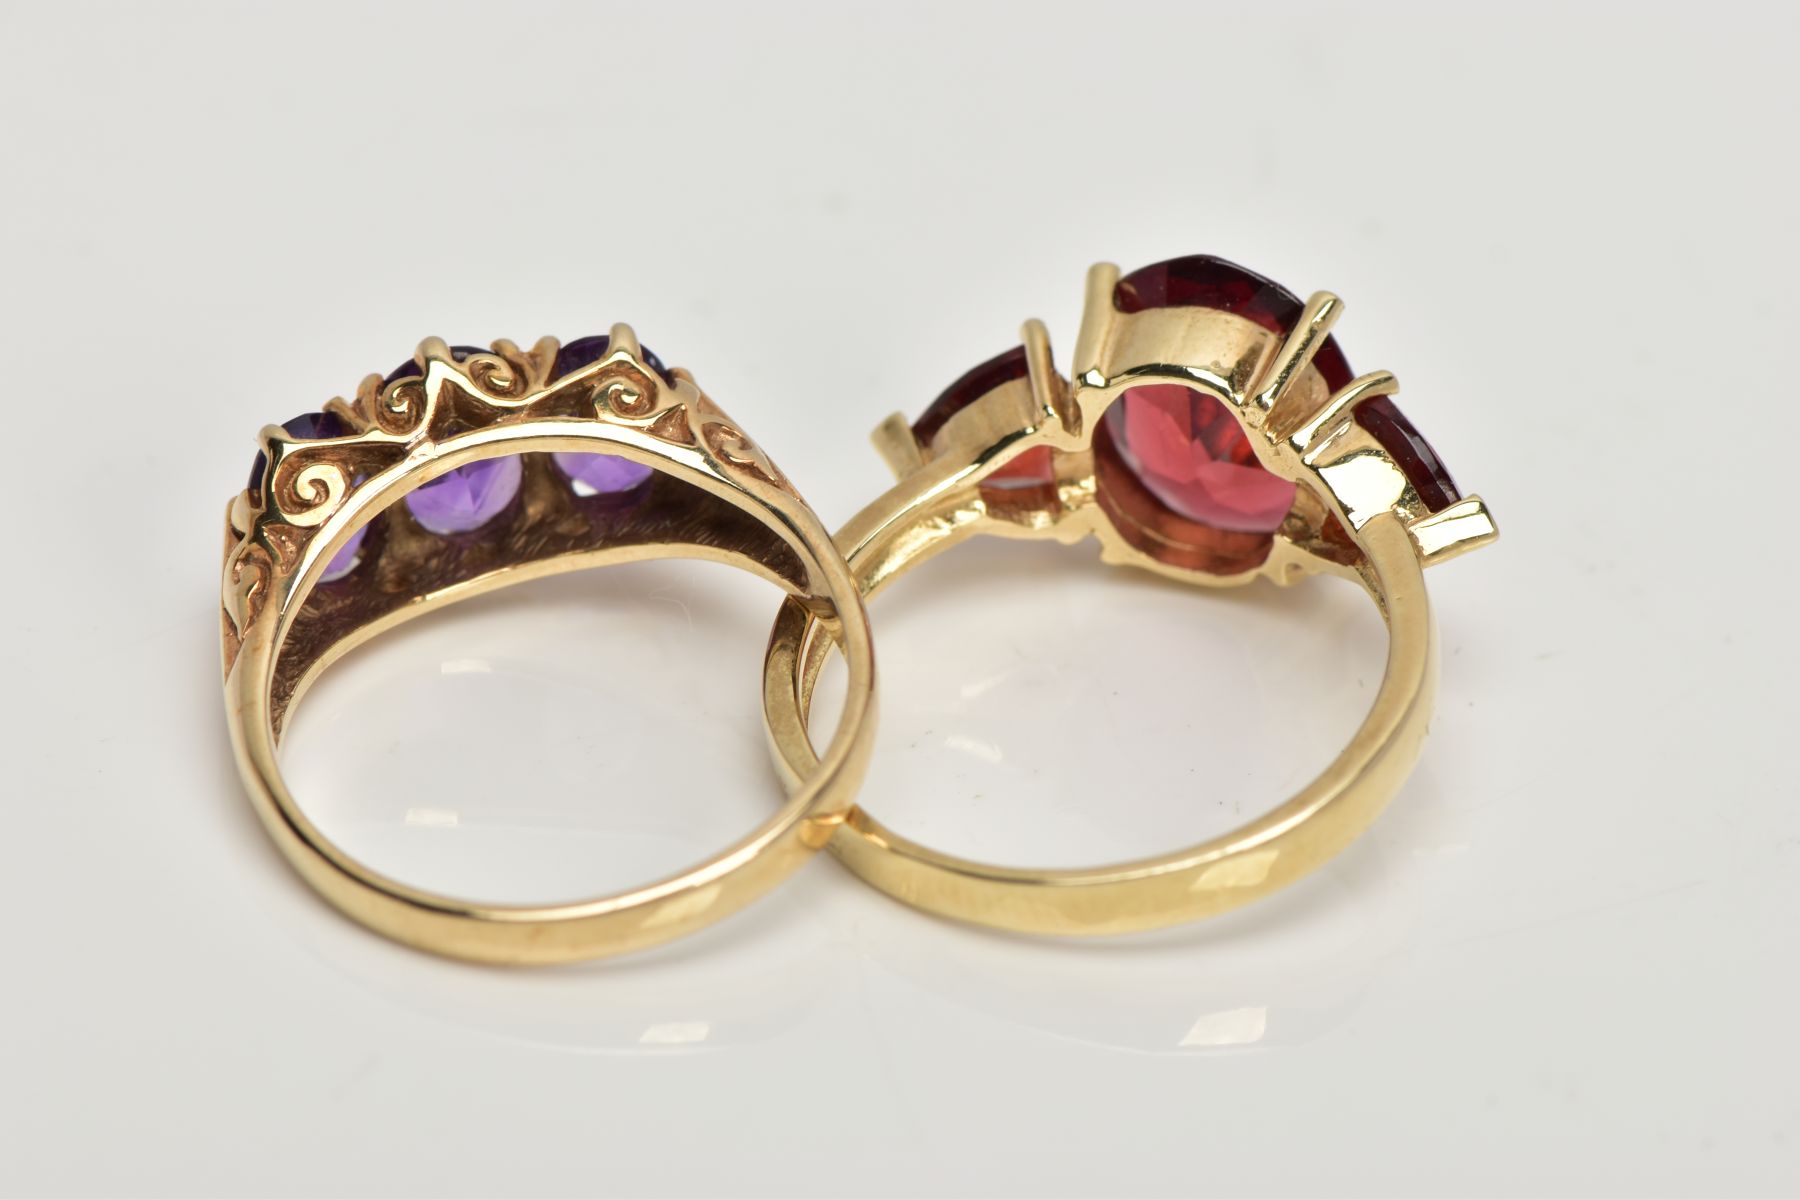 TWO 9CT GOLD GEM SET RINGS, the first designed with a central four claw set, oval cut garnet, - Image 3 of 3